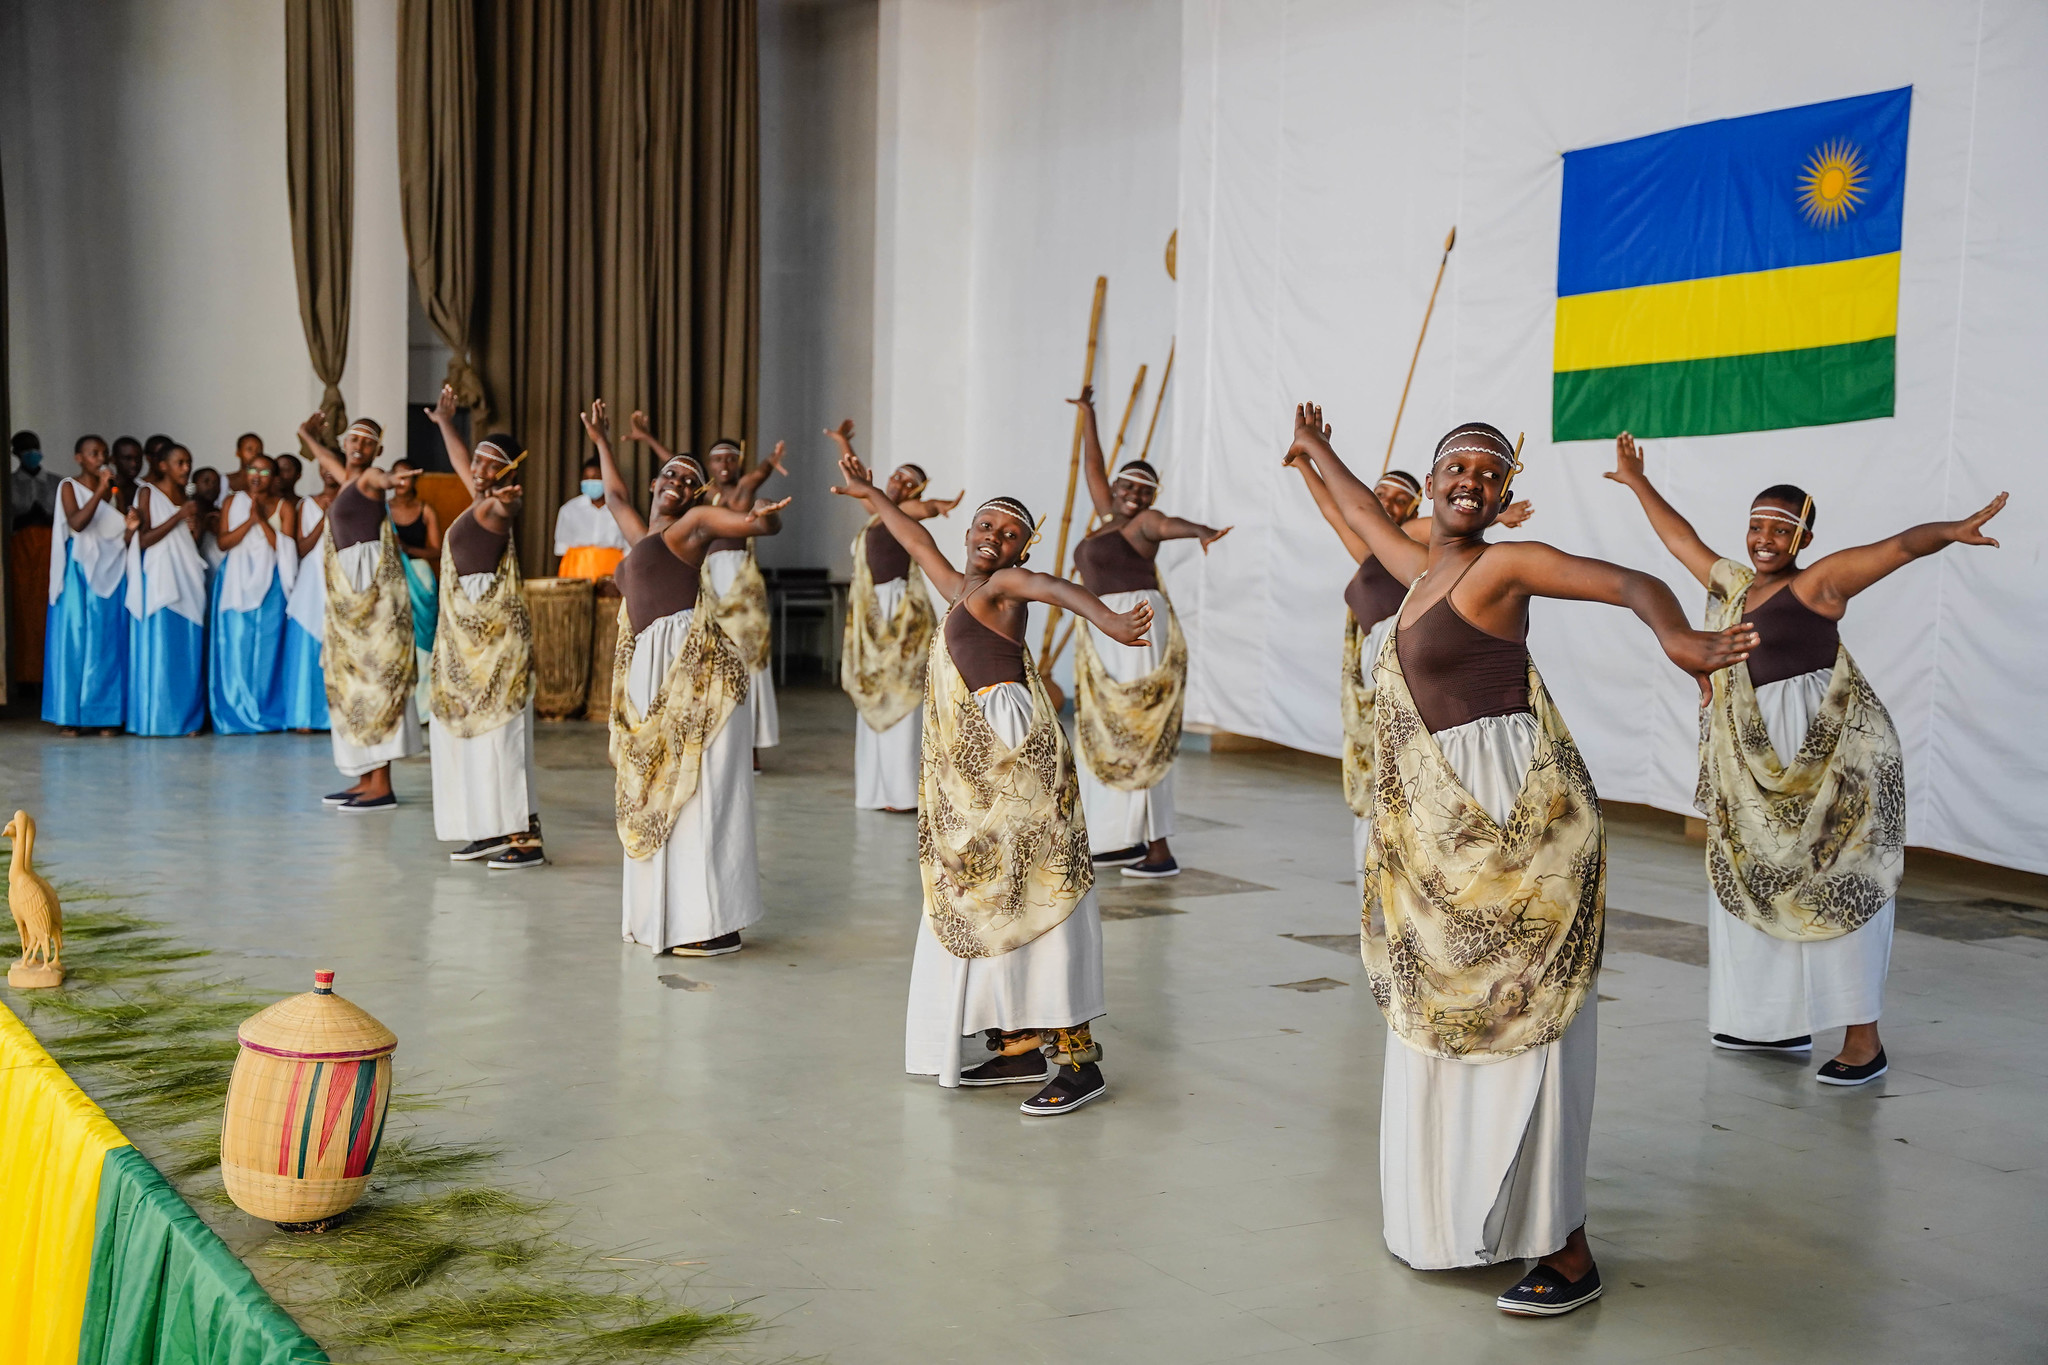 Students ballet entertain the audience during the official launch of the cultural month at LycÃ©e Notre Dame de Citeaux in Nyarugenge District on February 2. Dan Nsengiyumva